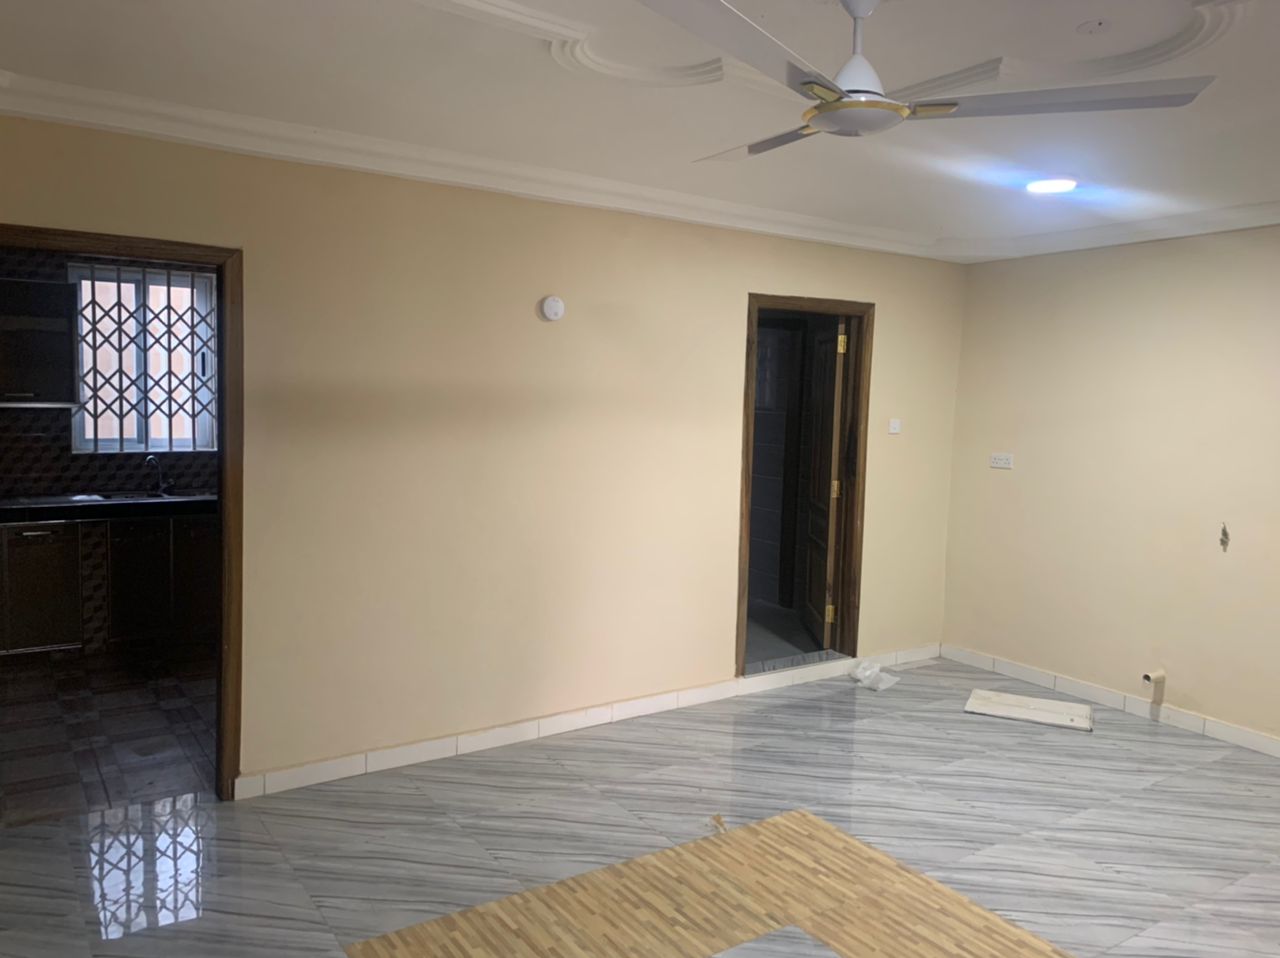 TWO BEDROOM APARTMENT AT DOME PILLAR 2 FOR RENT